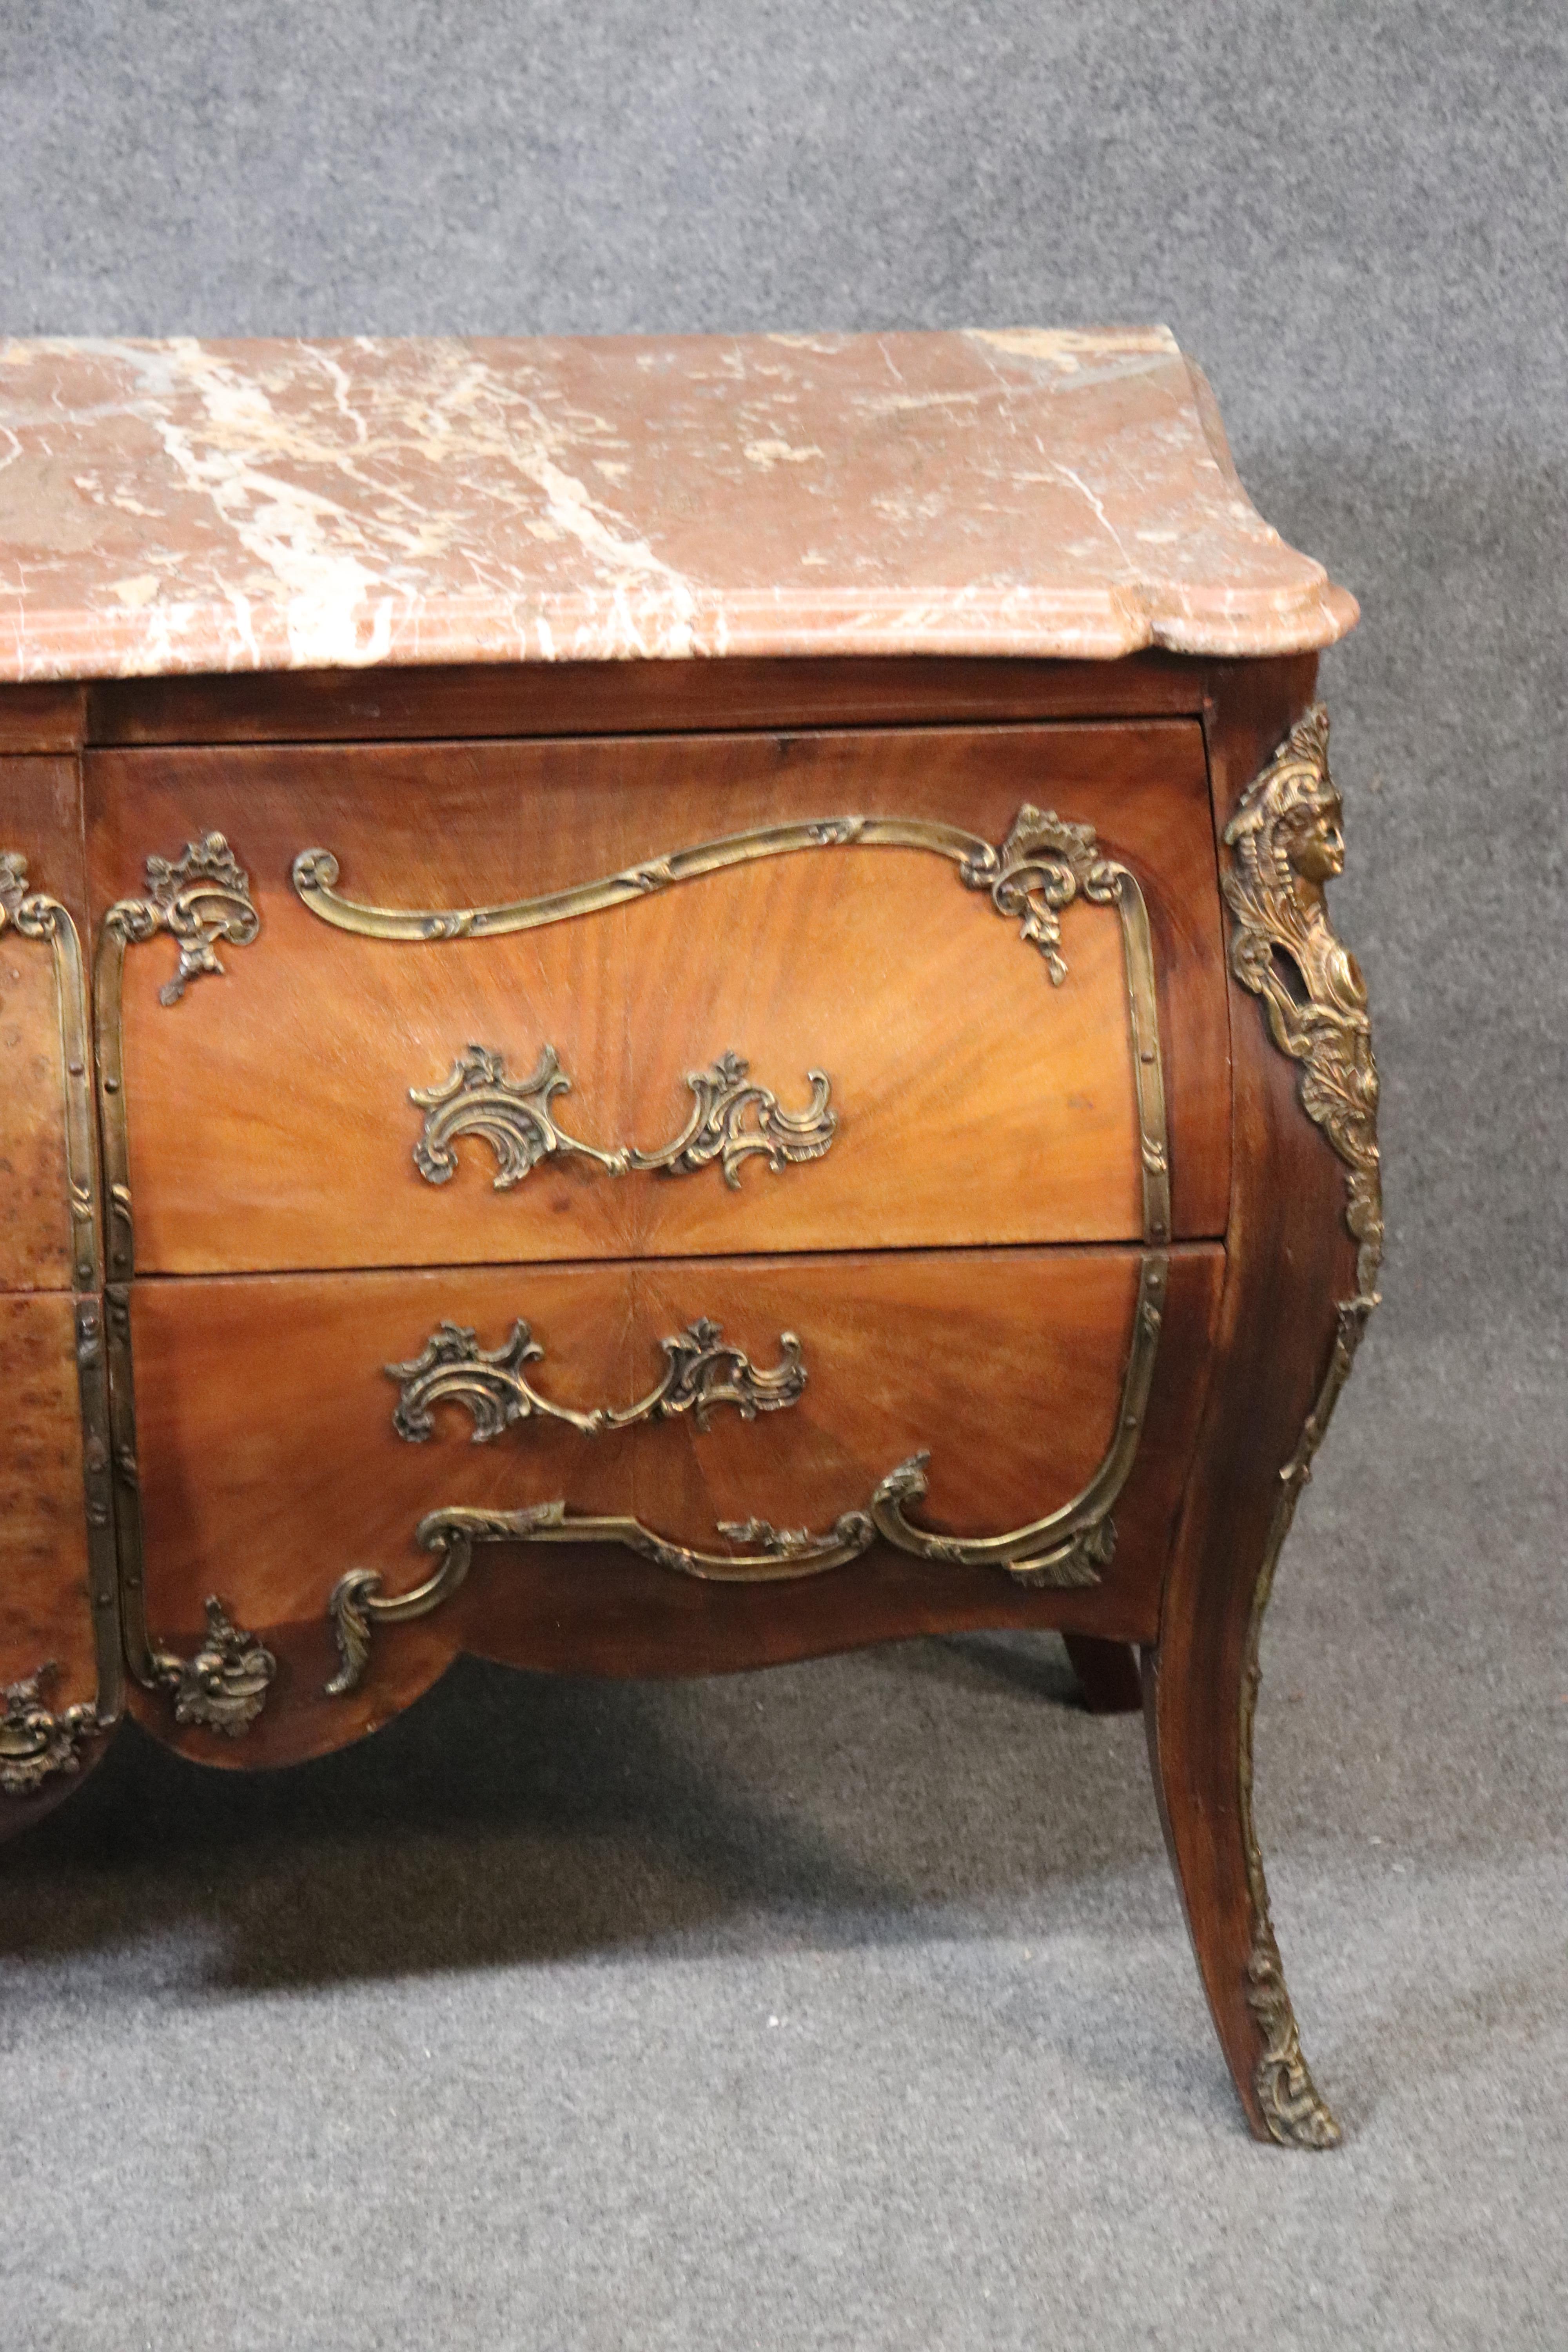 Early 20th Century French Louis XV Style Figural Bronze Mounted Marble-Top Commode Buffet Sideboard